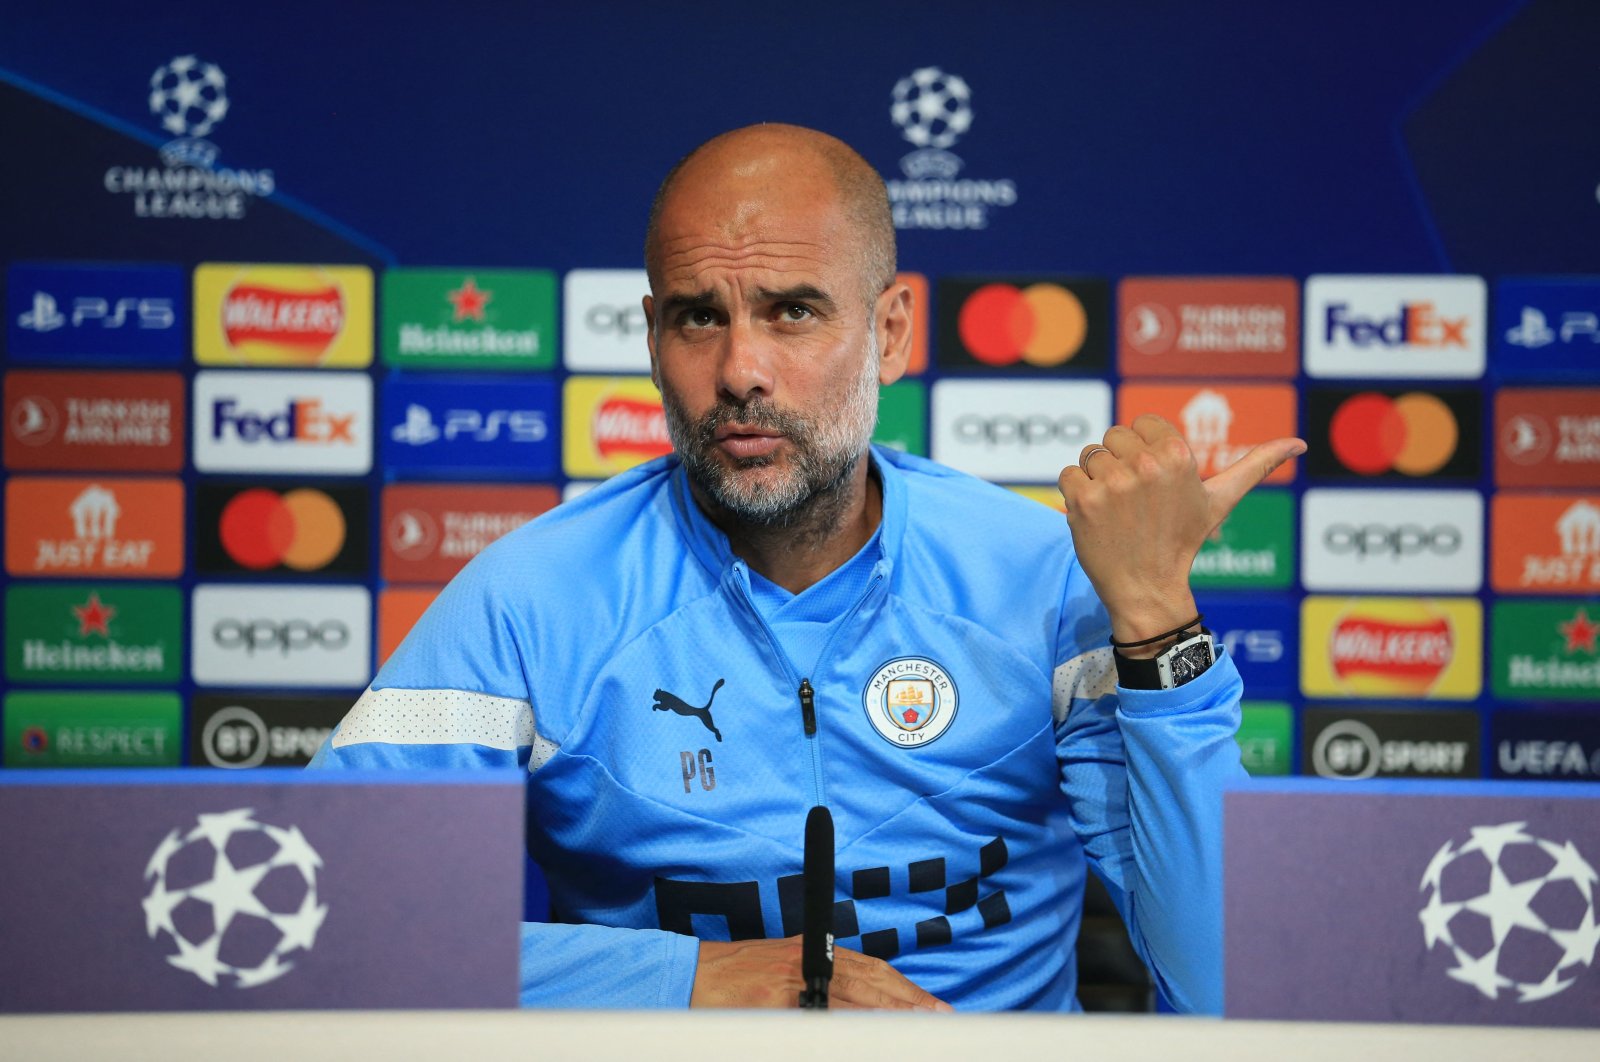 Manchester City manager Pep Guardiola speaks during a press conference on the eve of the UEFA Champions League match between Manchester City and Borussia Dortmund, Manchester, Britain, Sept. 13, 2022. (AFP Photo)